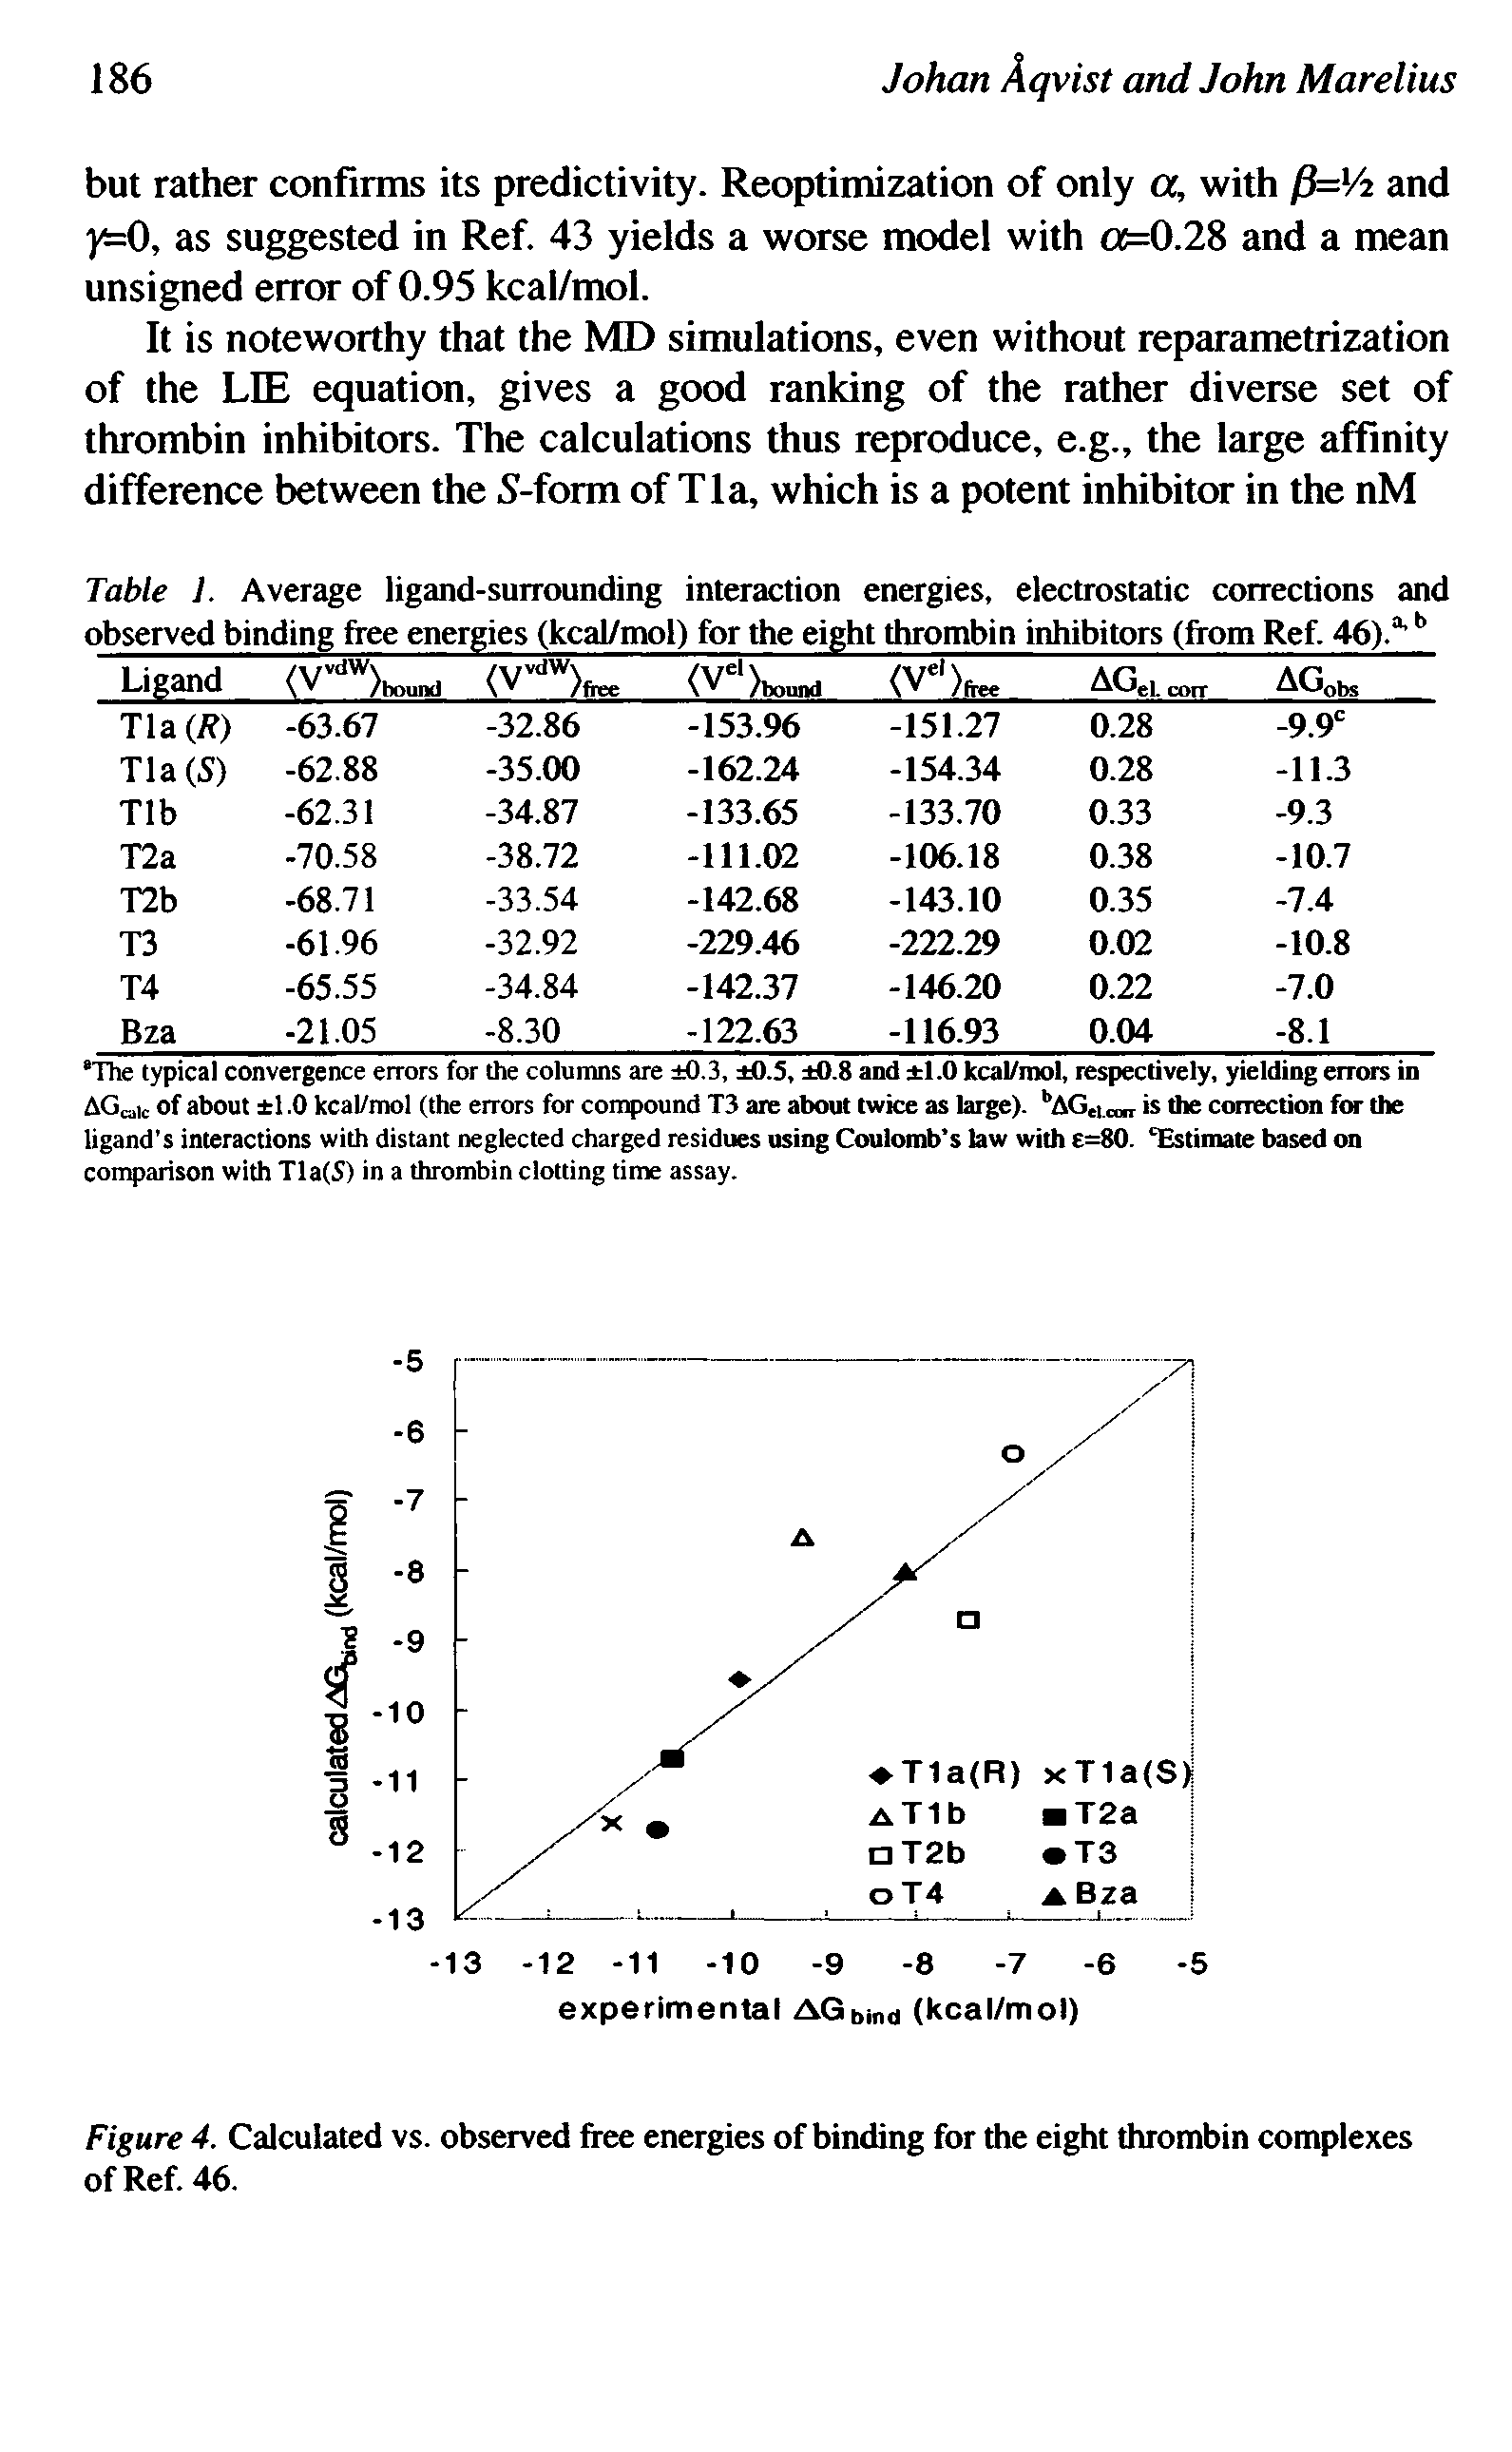 Table 1. Average ligand-surrounding interaction energies, electrostatic corrections and observed binding free energies (kcal/mol) for the eight thrombin inhibitors (from Ref. 46). b...